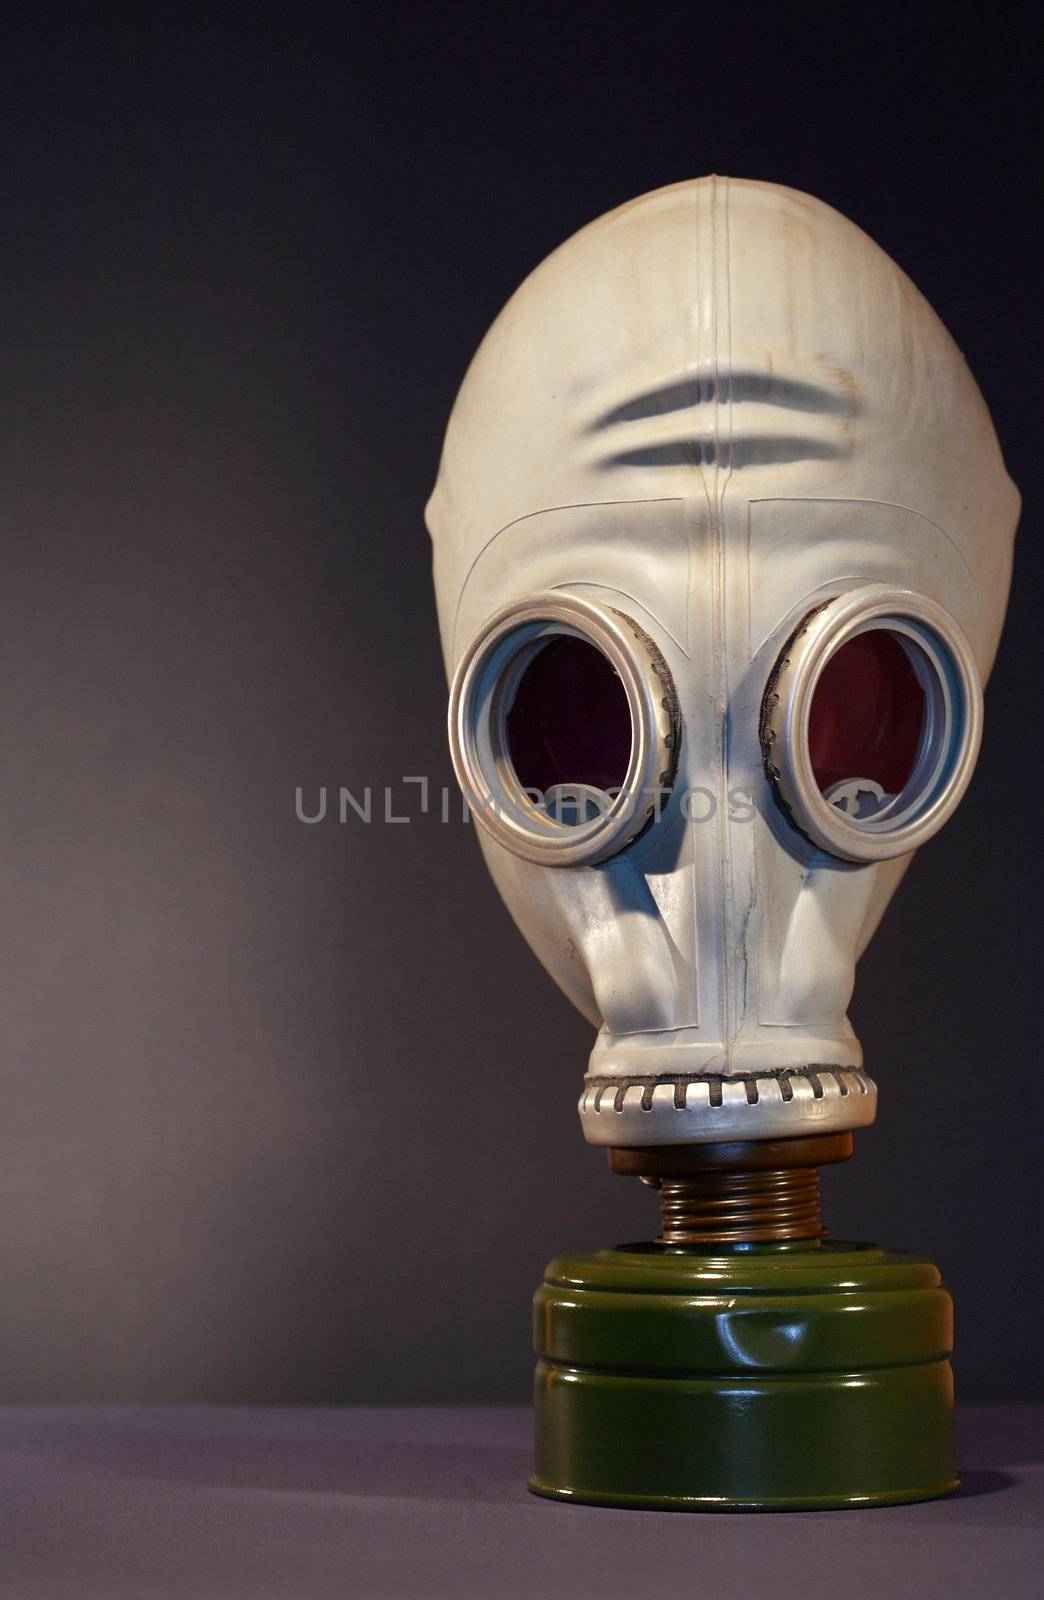 Old gas mask standing on dark background with copy space